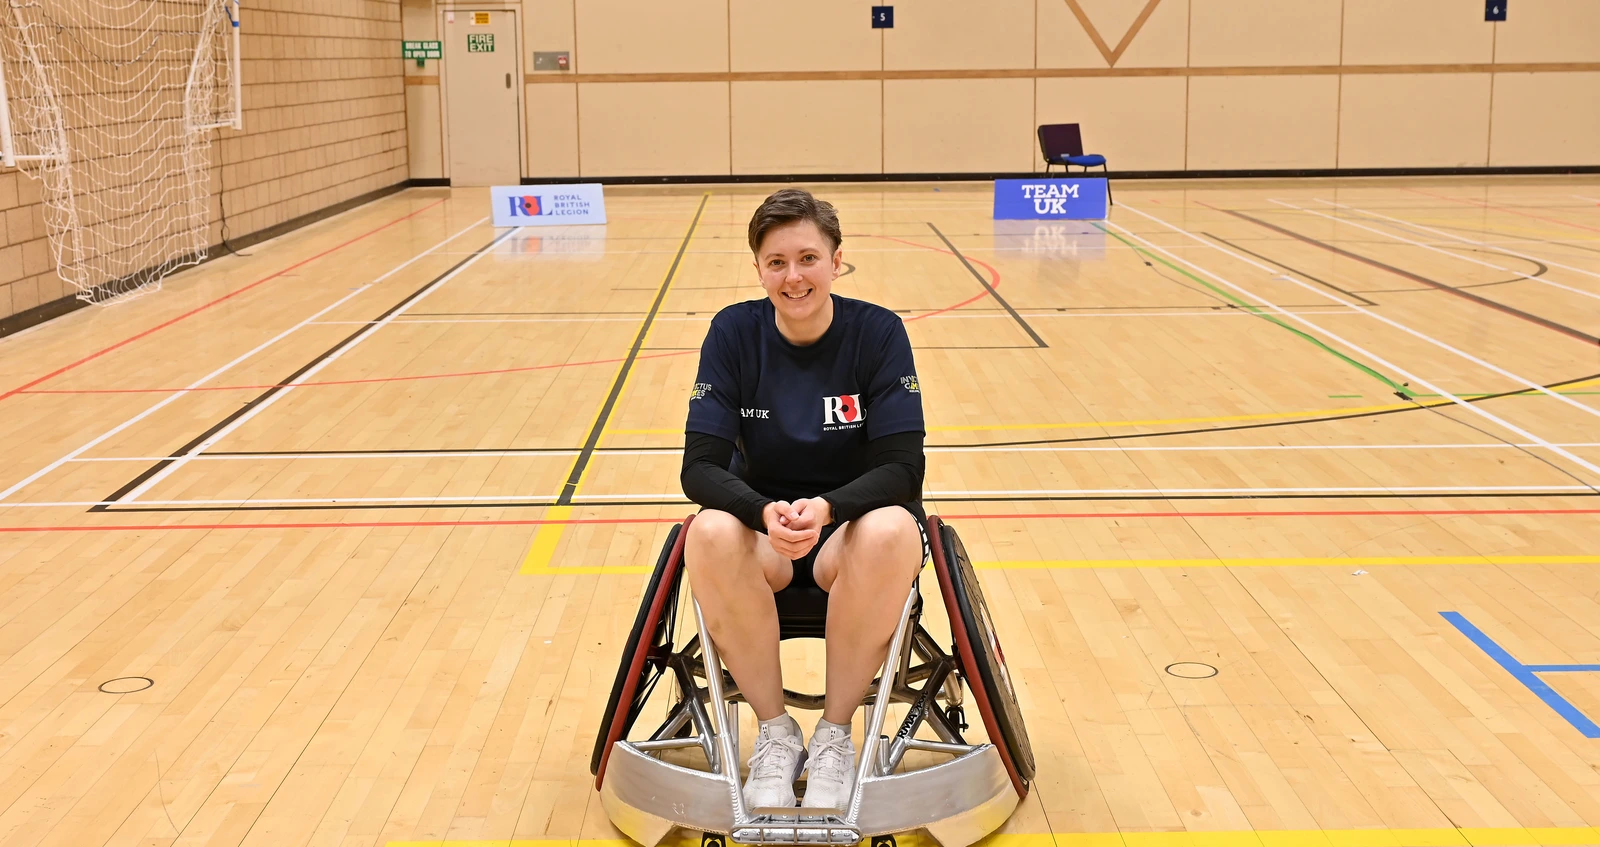 Liz in a wheelchair in a basketball court. She is facing the camera head on, wearing a navy Team UK RBL shirt. Behind her we can see some Team UK and RBL signs.